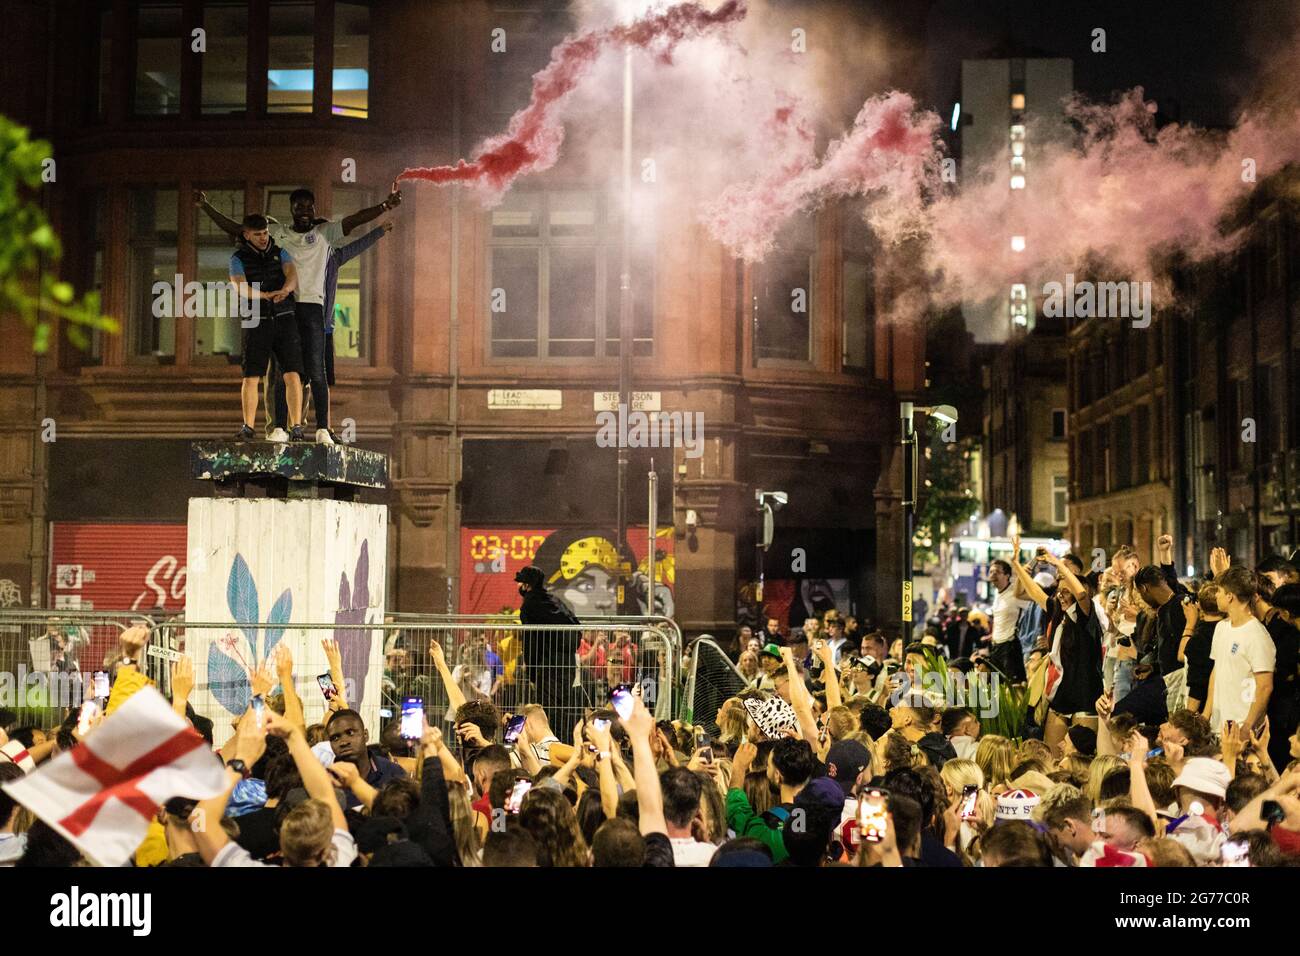 Manchester, UK. 11th July, 2021. Regardless of losing against Italy in the Euro2020 final, England fans celebrate in Stevenson Square after the game. Credit: Andy Barton/Alamy Live News Stock Photo